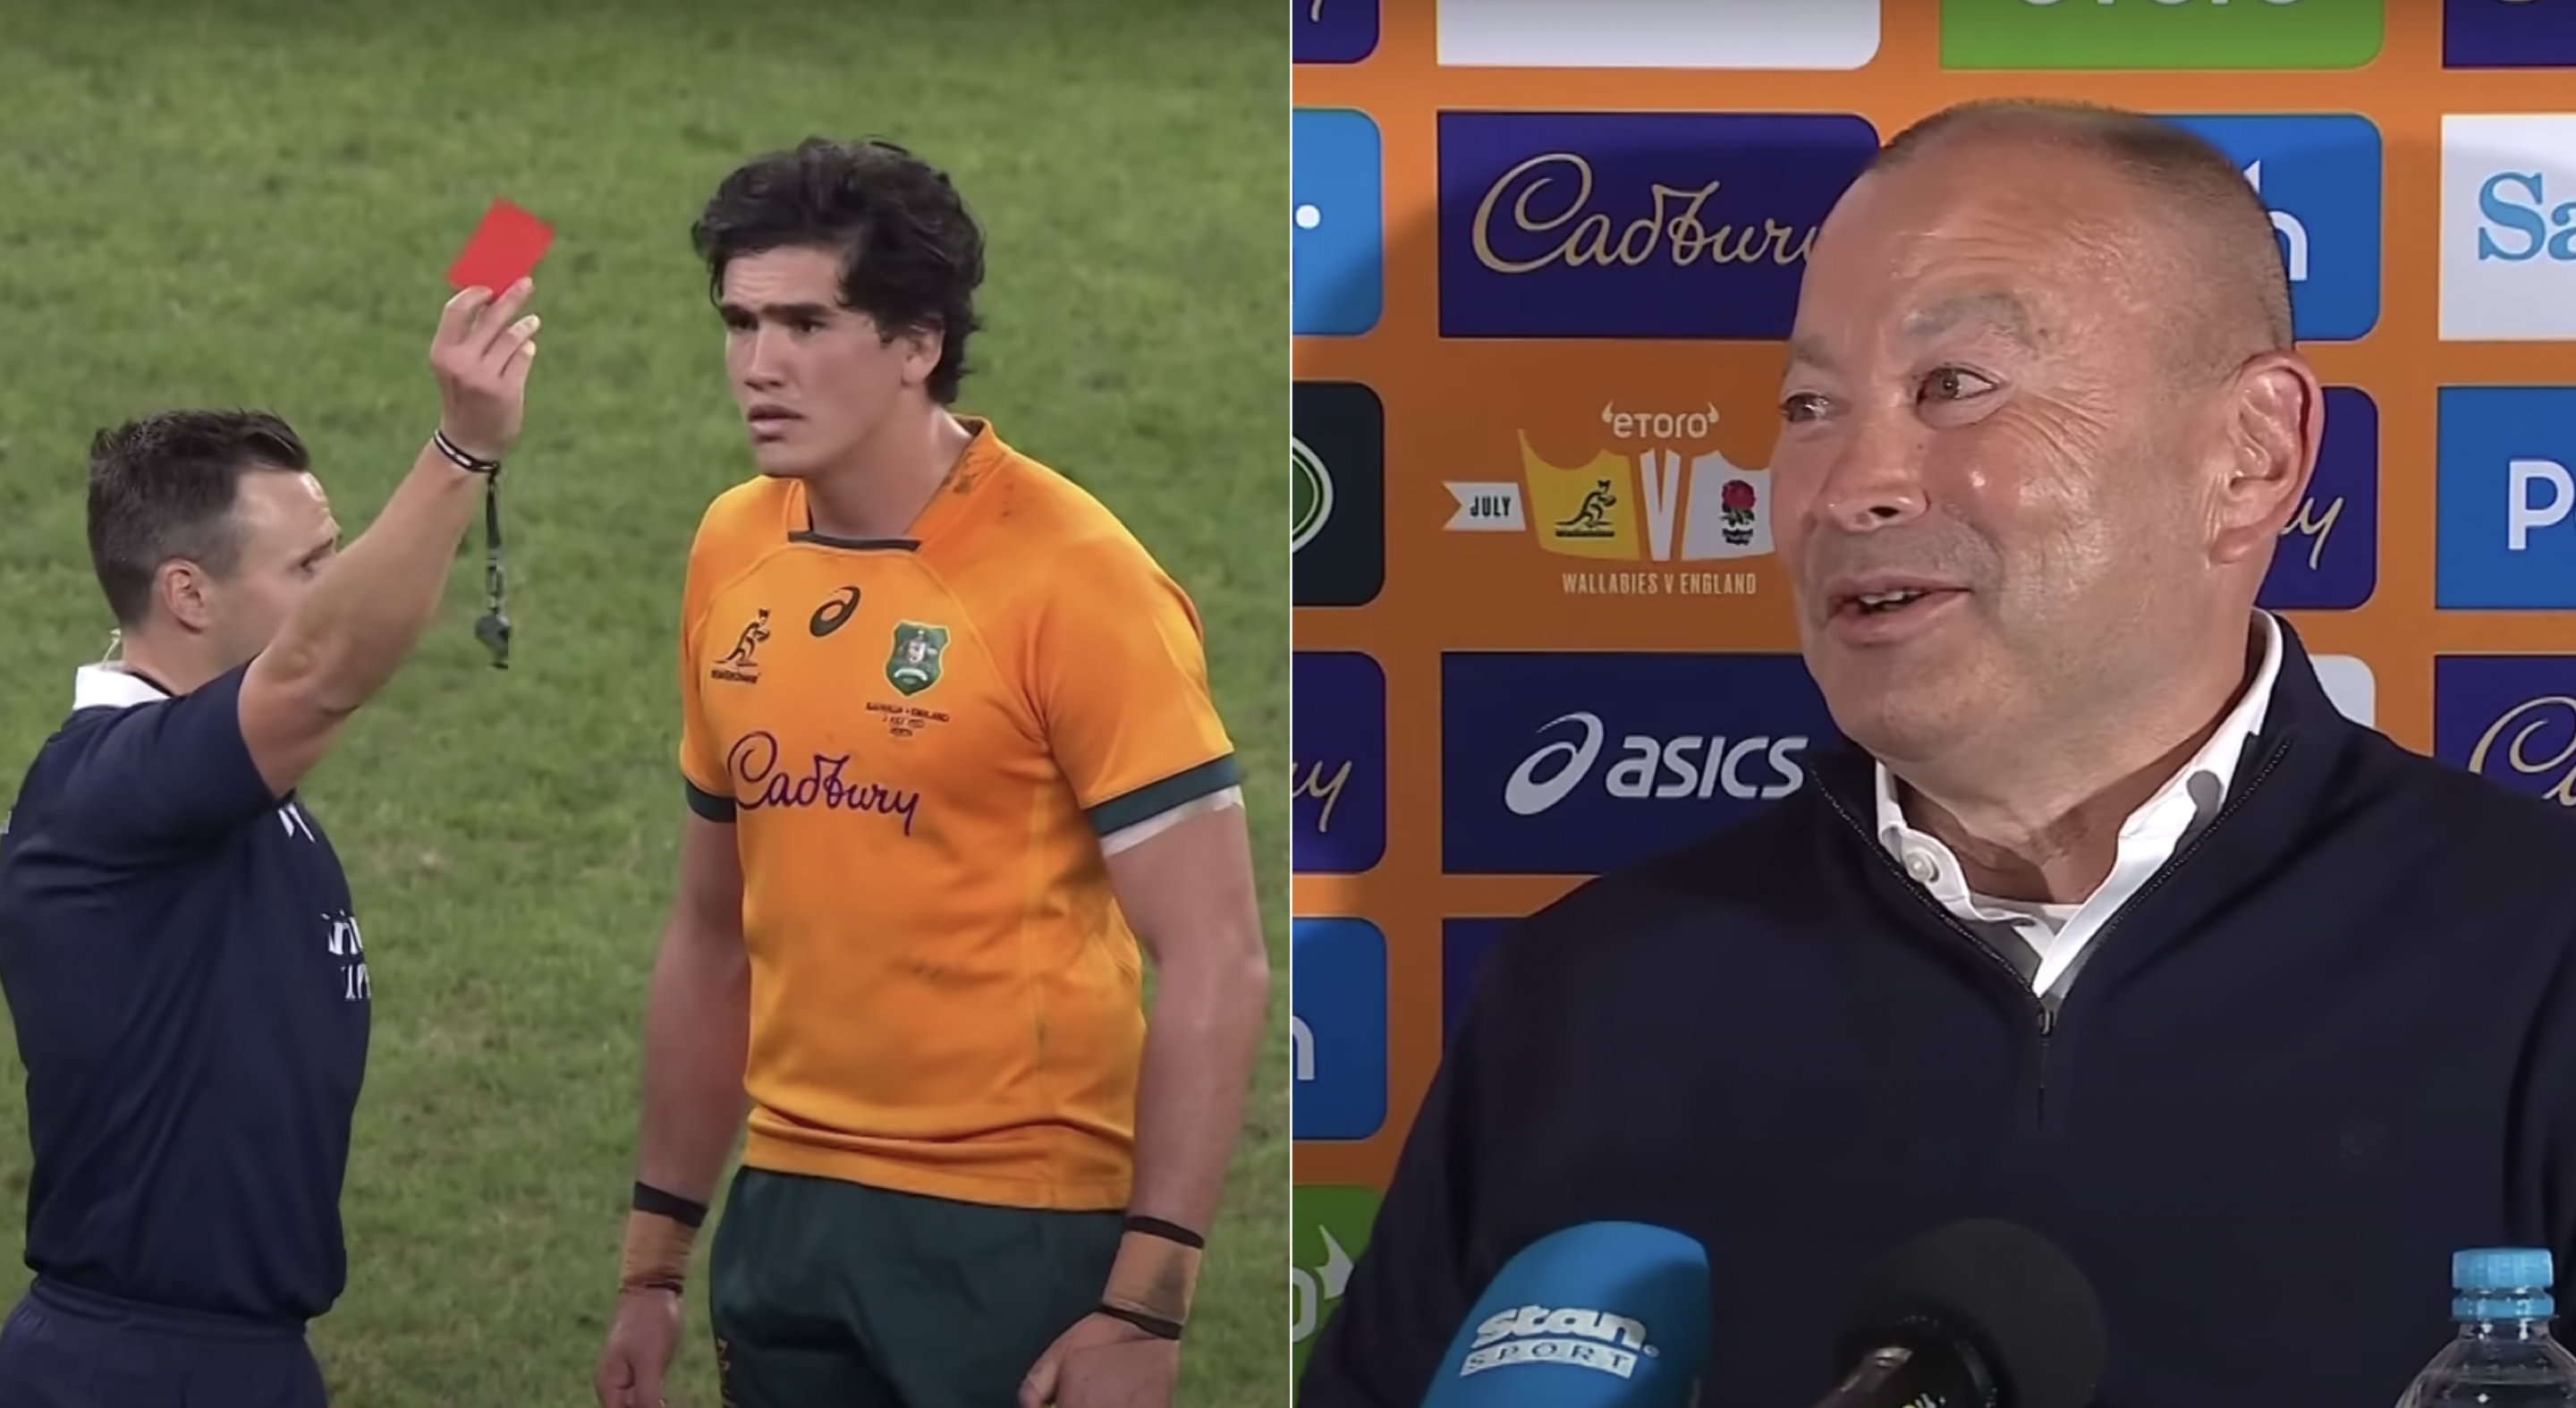 'Don't deflect, that's on you': Ex All Black slams Eddie Jones after ref rant